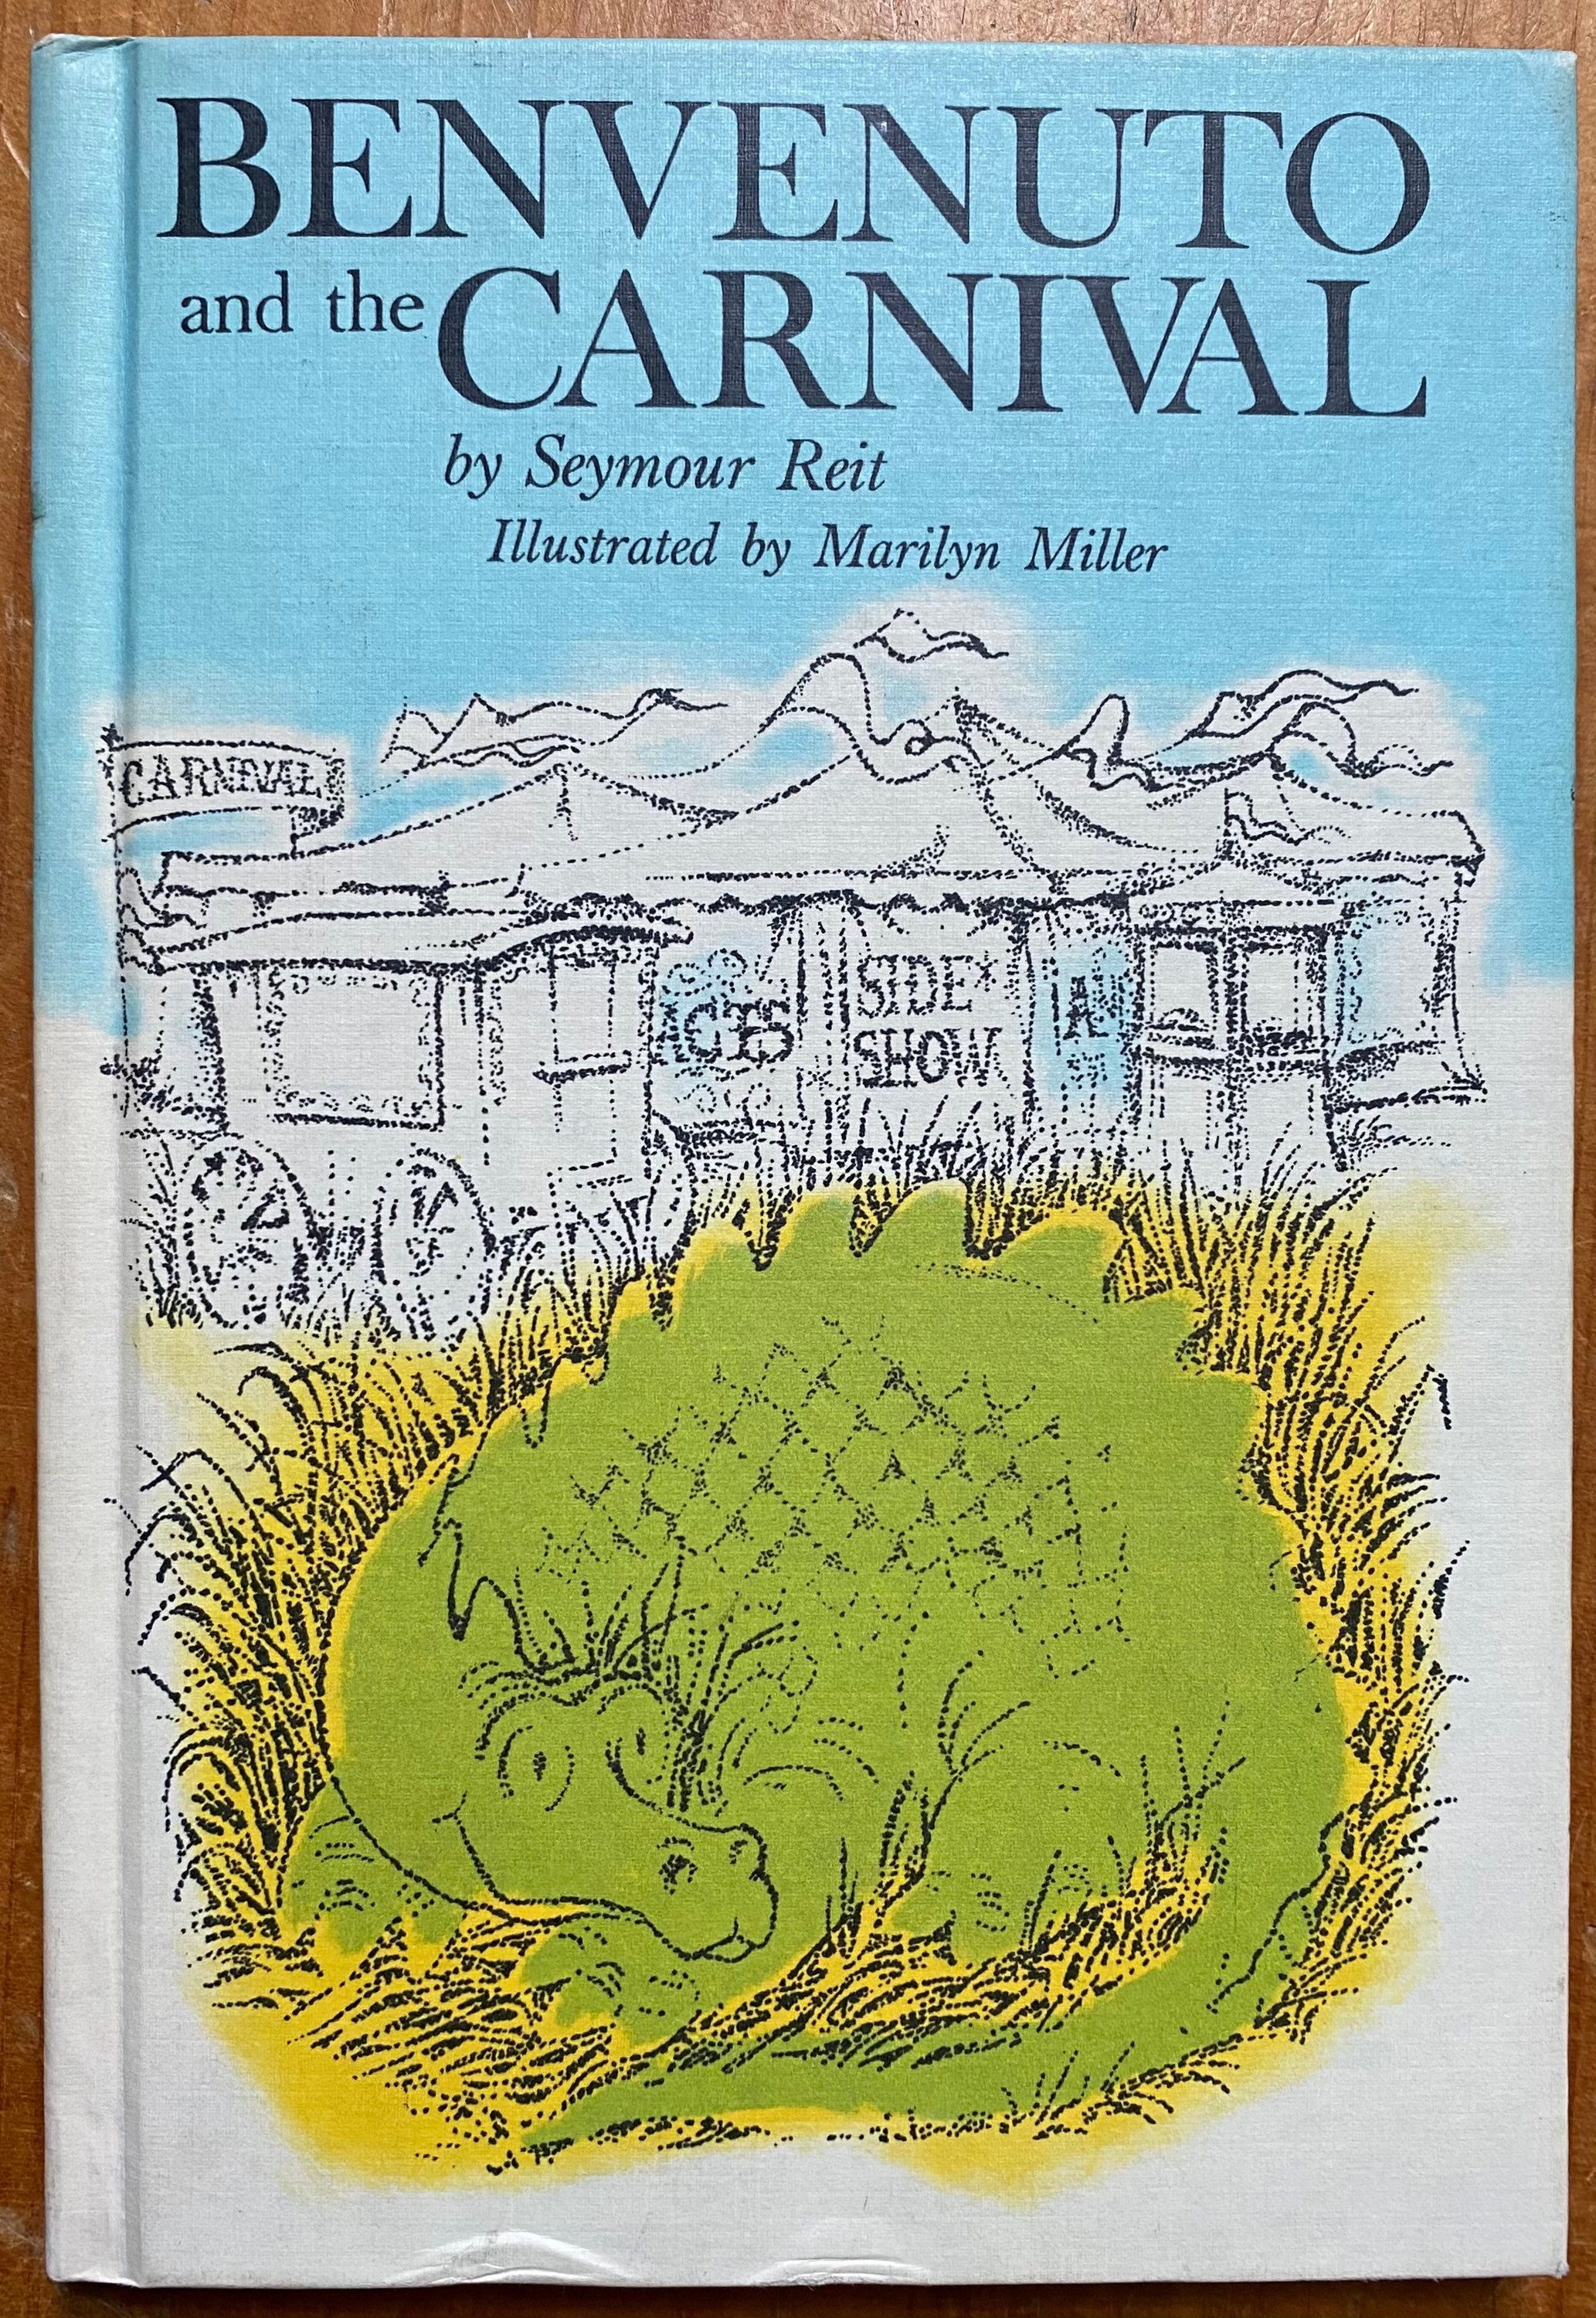 Reit　Seymour　and　Carnival　Benvenuto　the　Etsy　Illustrated　by